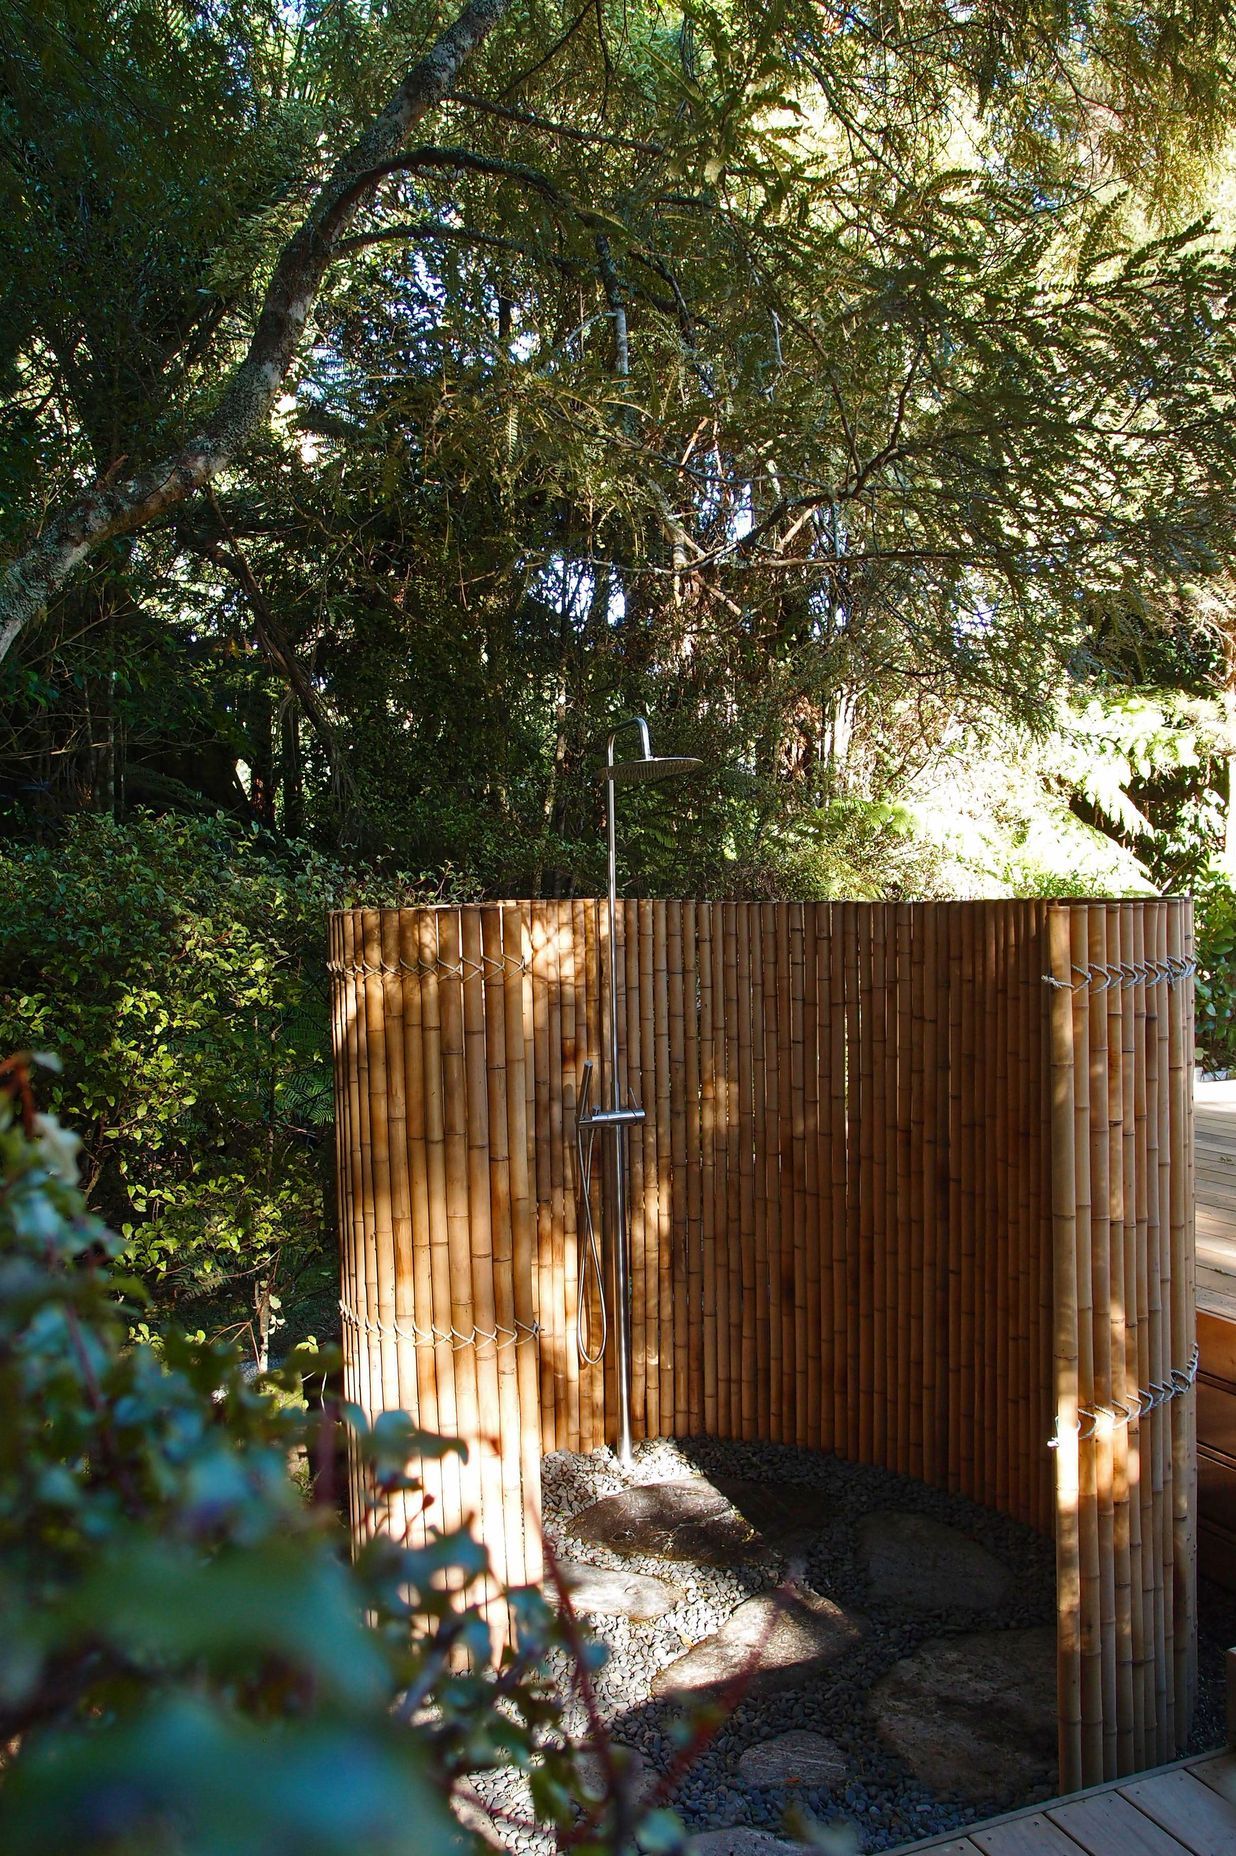 The outdoor shower is enclosed by a bamboo screen in a spiral. The floor is smooth schist and rounded pebble.